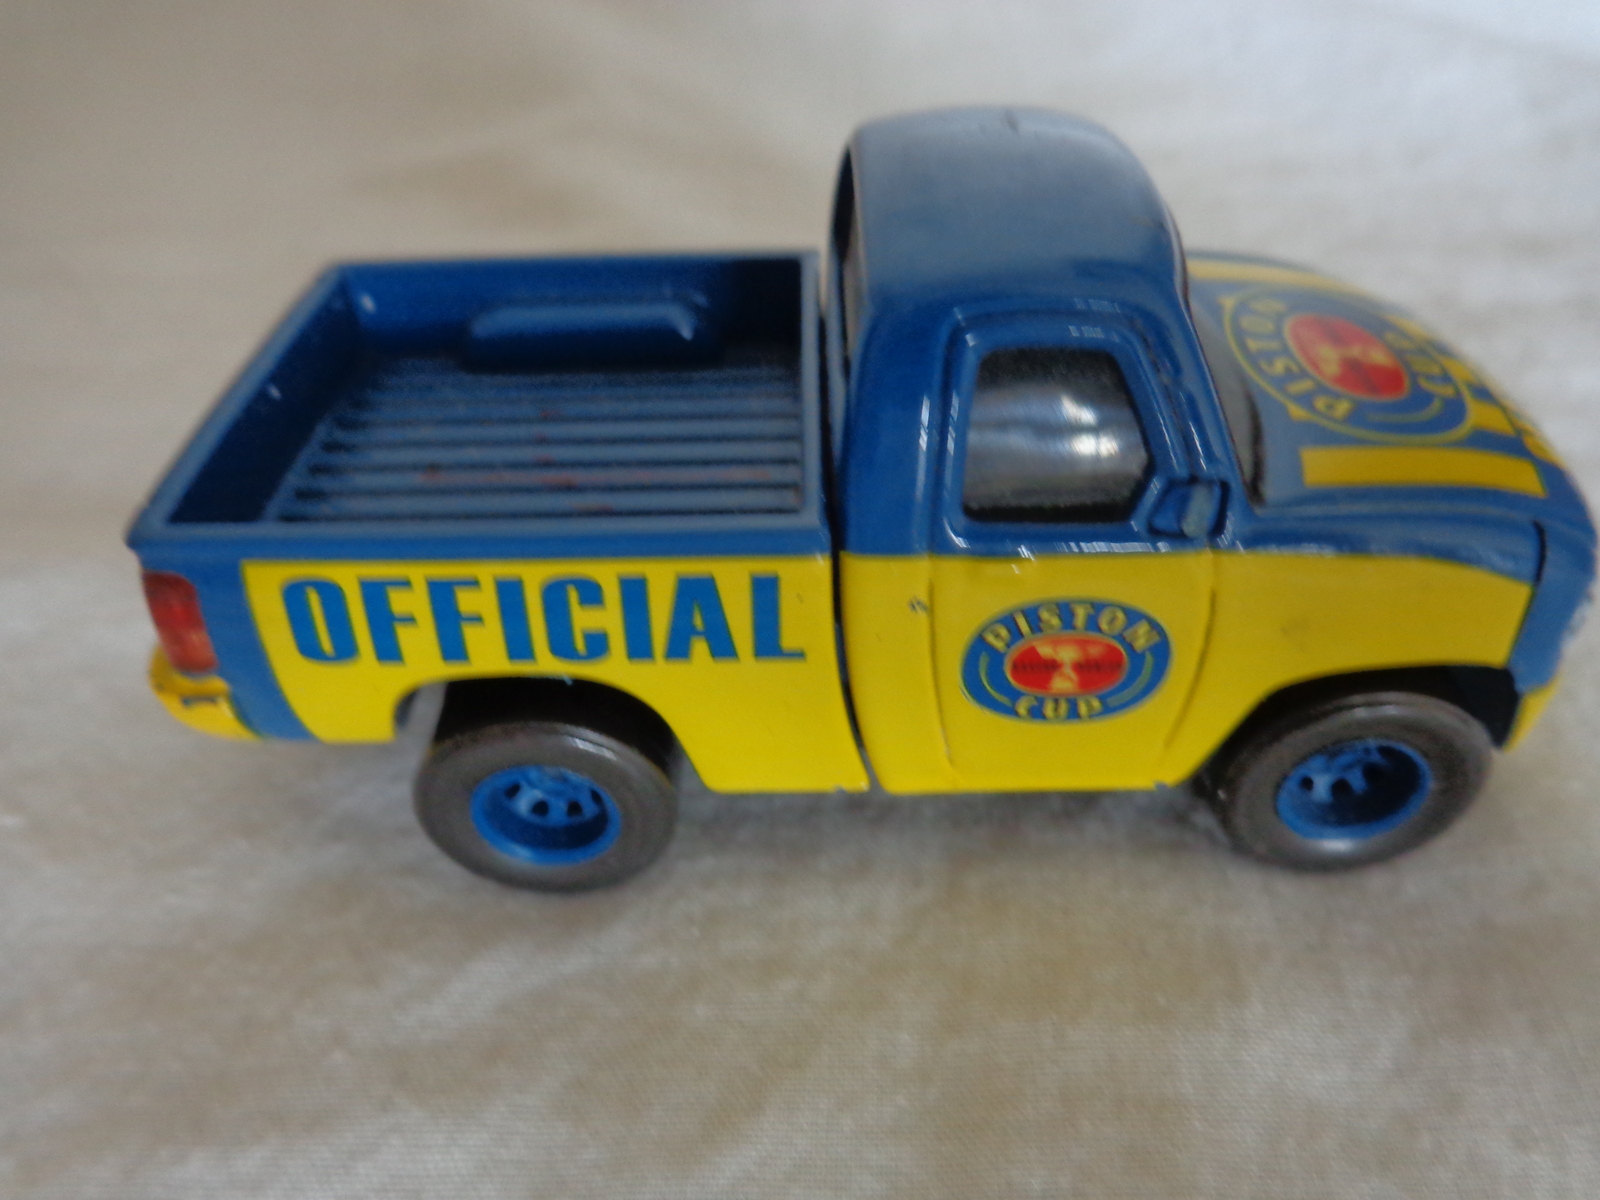 Primary image for Piston Cup Official Truck Disney Pixar #2869 EAB (#2708/19)